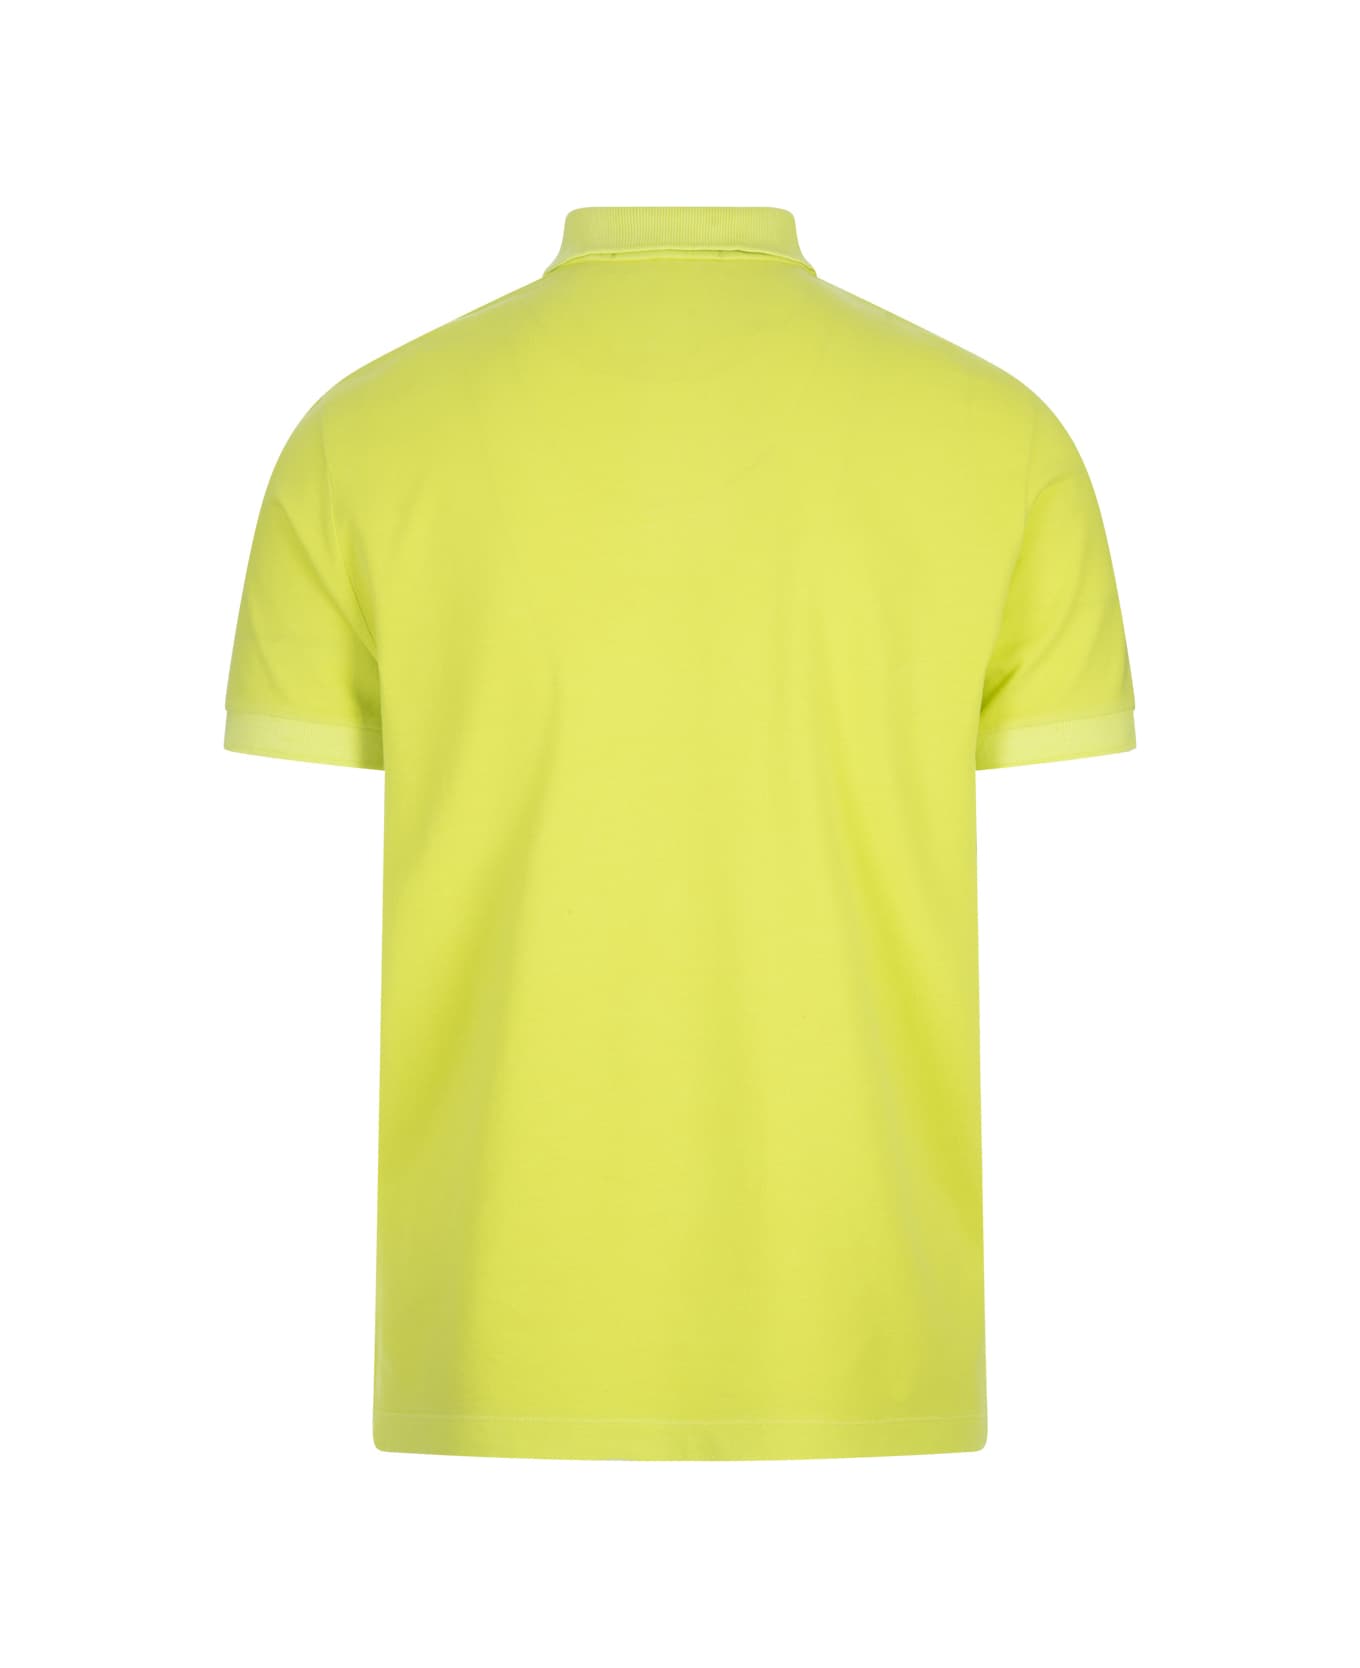 Stone Island Yellow Pigment Dyed Slim Fit Polo Shirt - Yellow